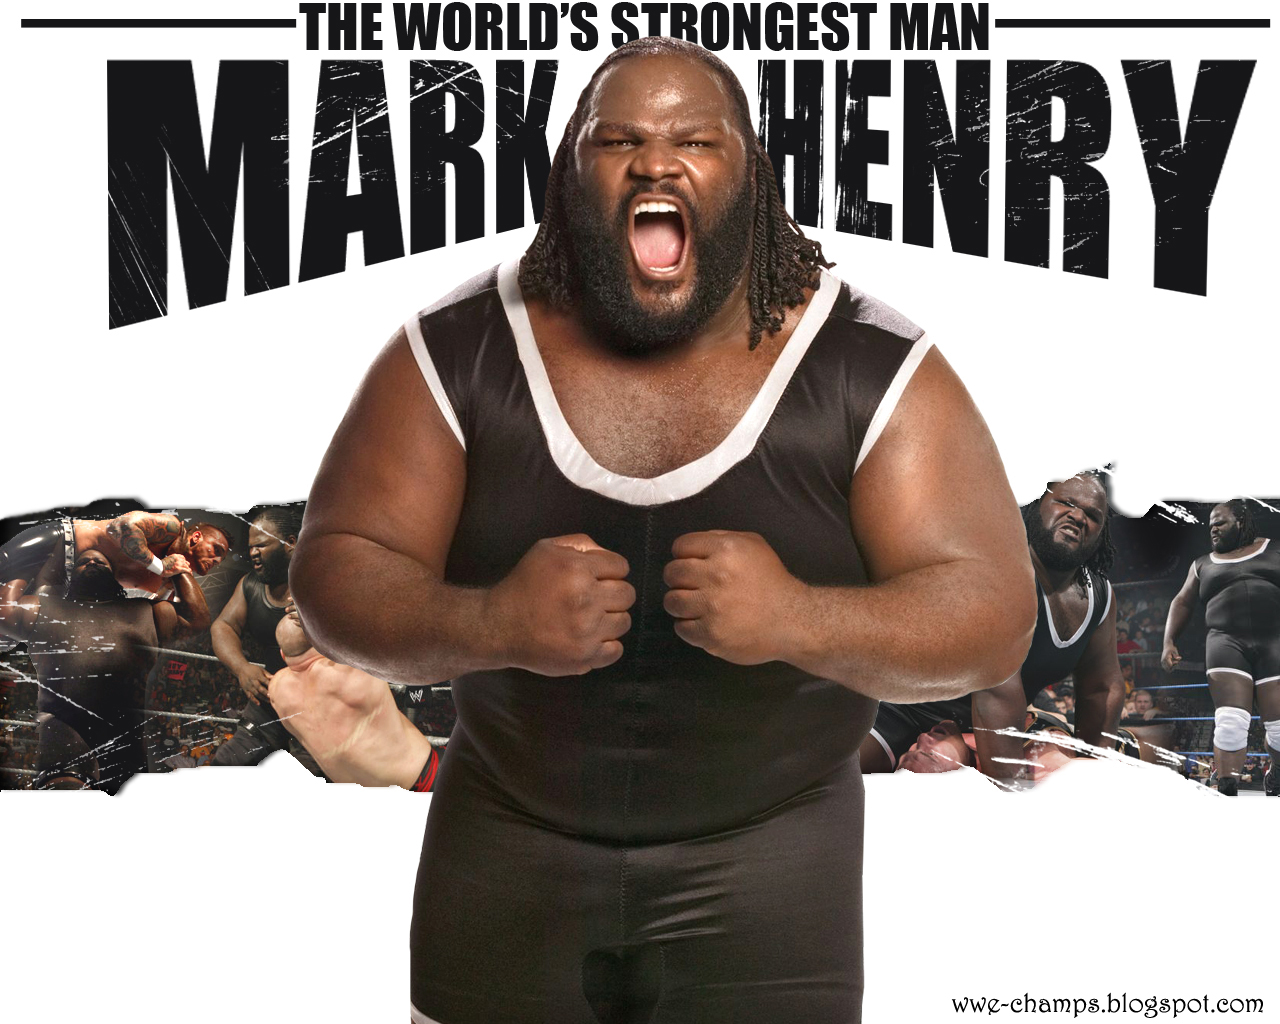 WWE CHAMPS 'THE WORLD'S STRONGEST MAN' MARK HENRY